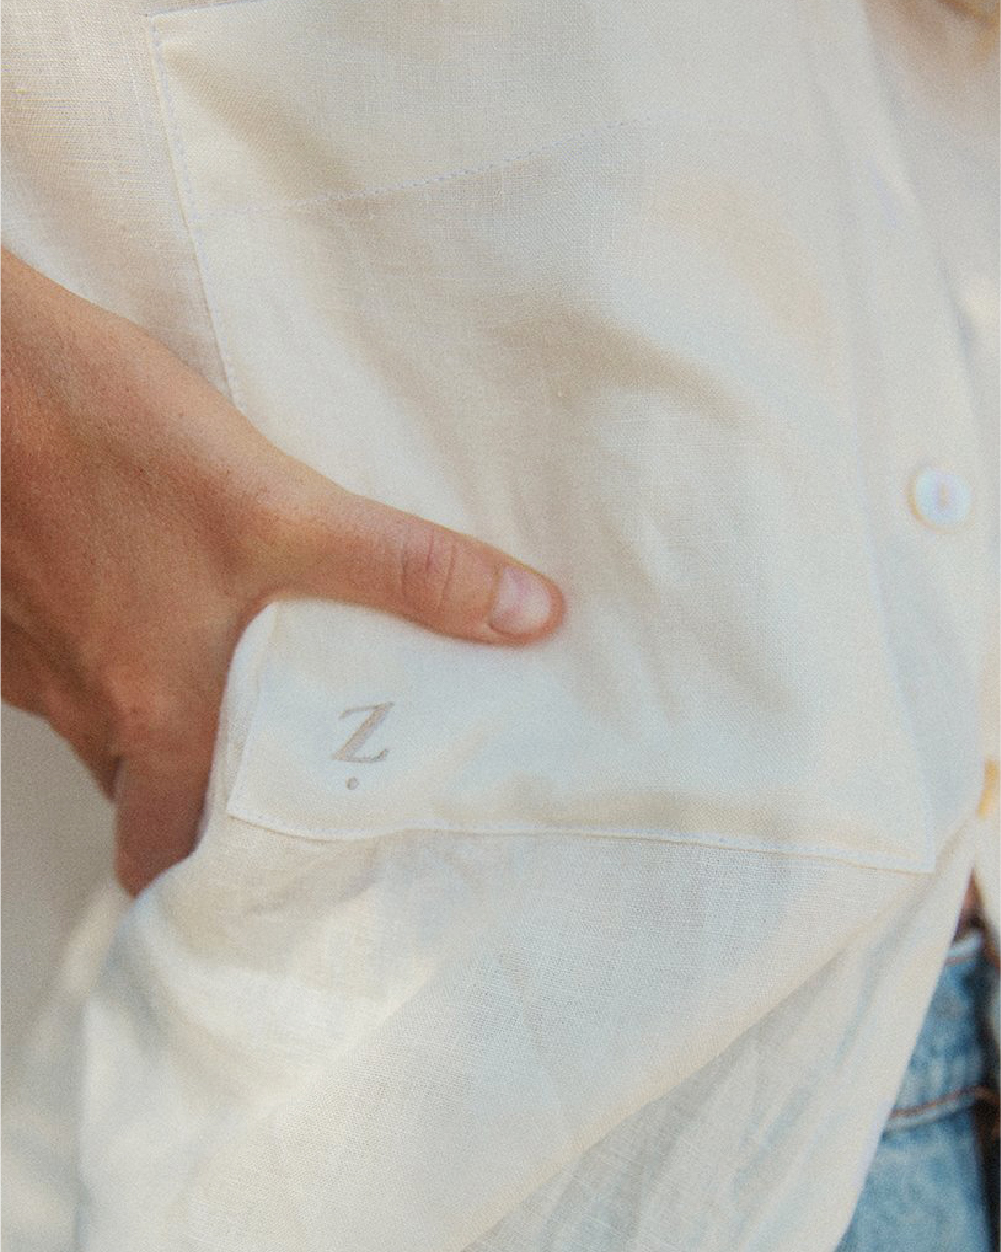 Z logo embroidered on shirt